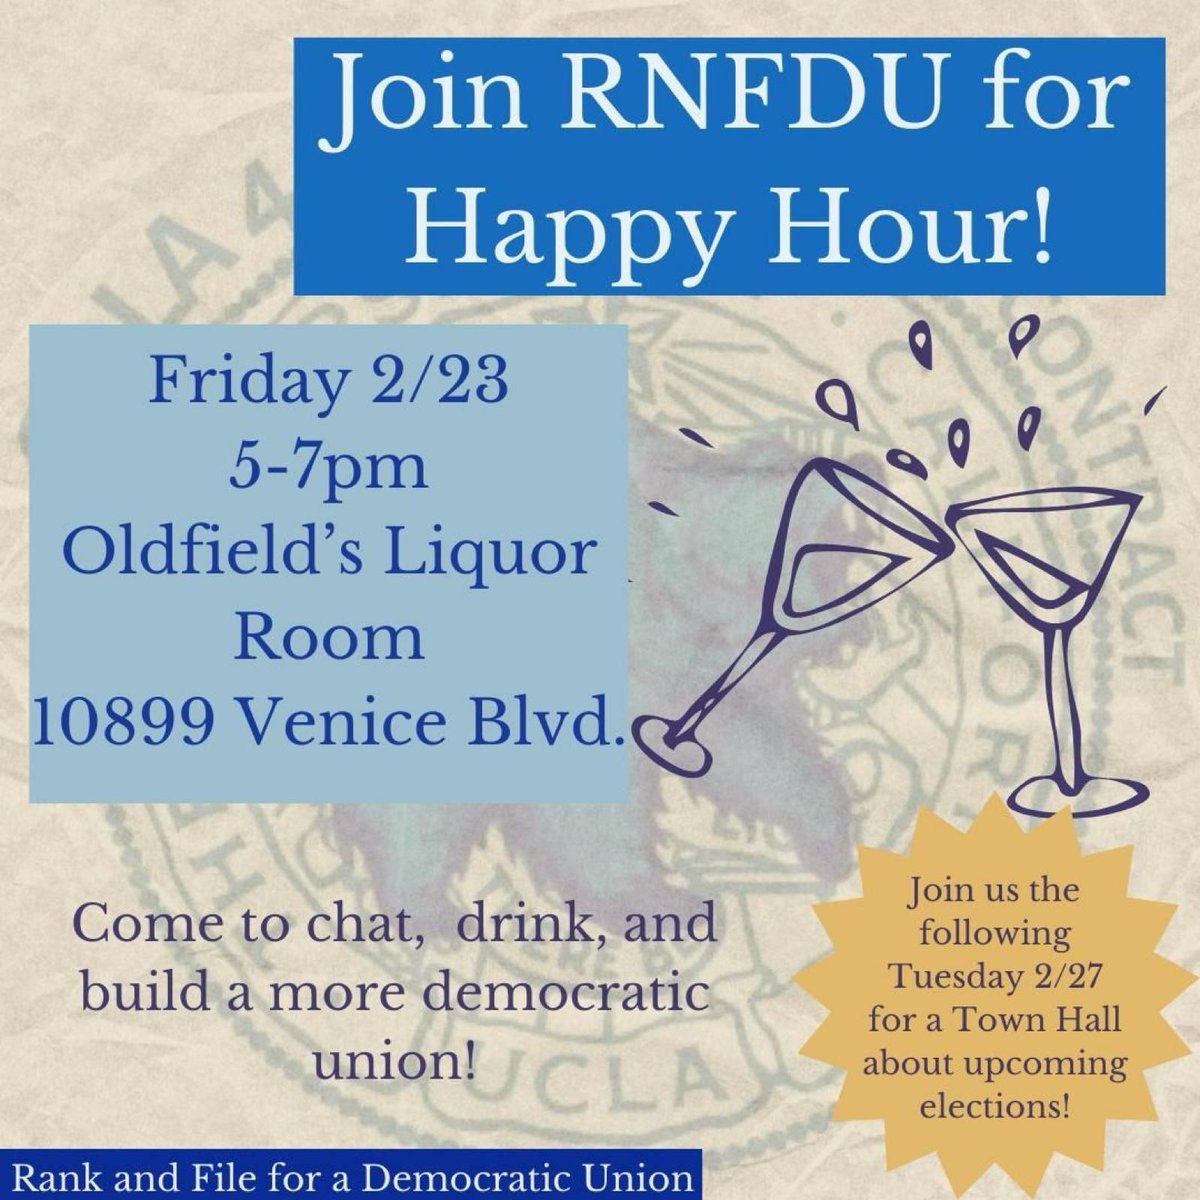 JOIN US FOR HAPPY HOUR! Meet your coworkers and chat about how we can build a more democratic union and improve our working conditions! WHERE: OLDFIELDS WHEN: FRIDAY 2/23, 5-7 PM WHO: YOU